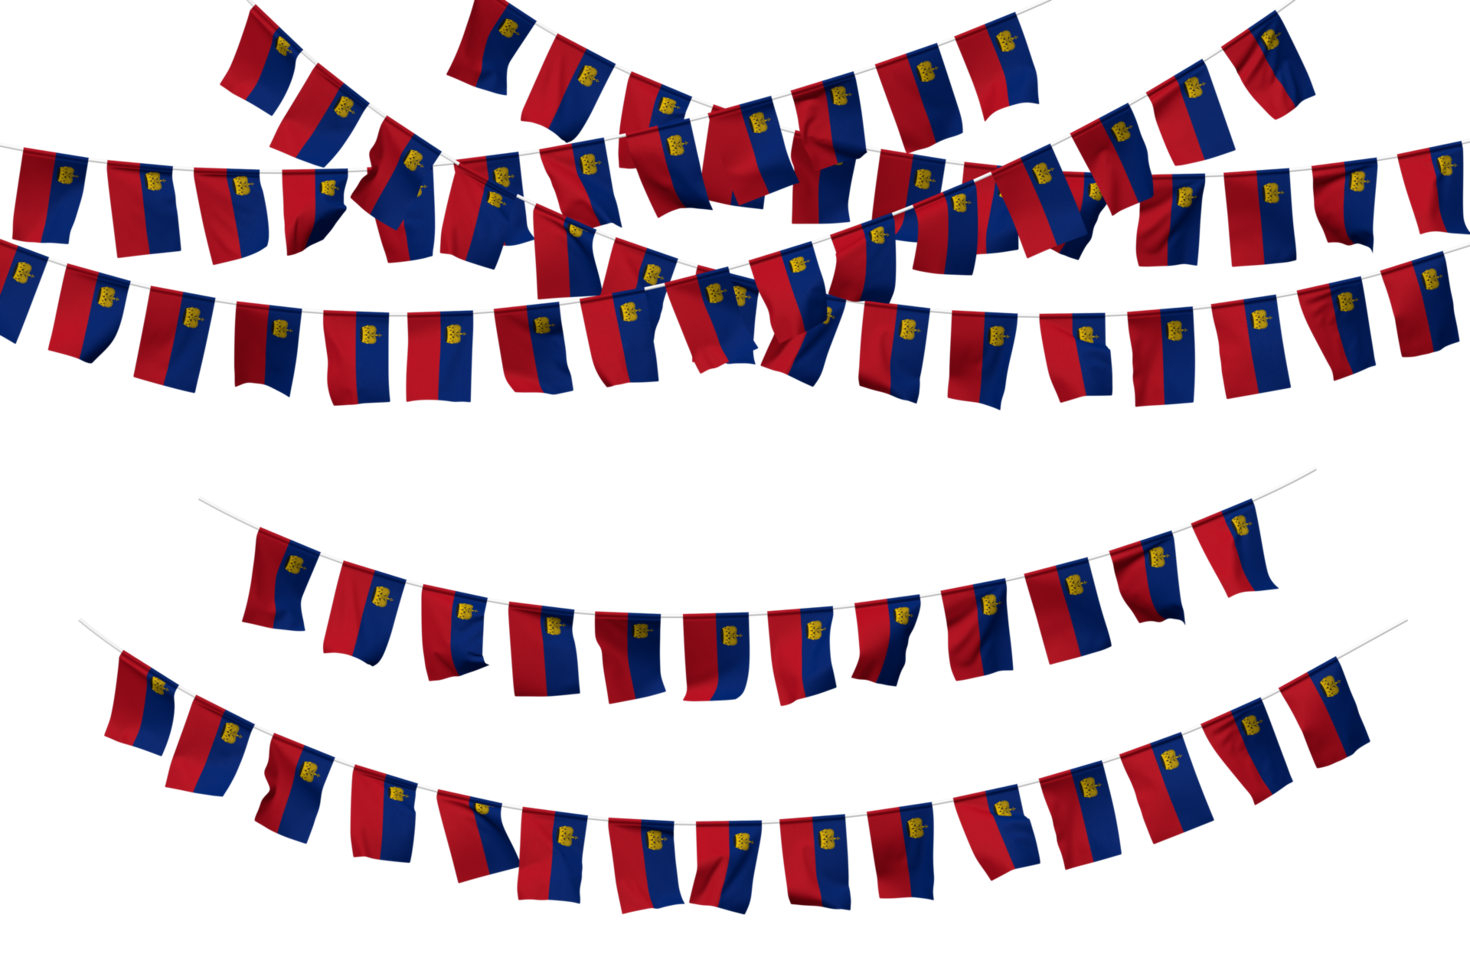 Liechtenstein Flag Bunting Decoration on The Rope, Jhandi, Set of Small Flag Celebration, 3D Rendering png